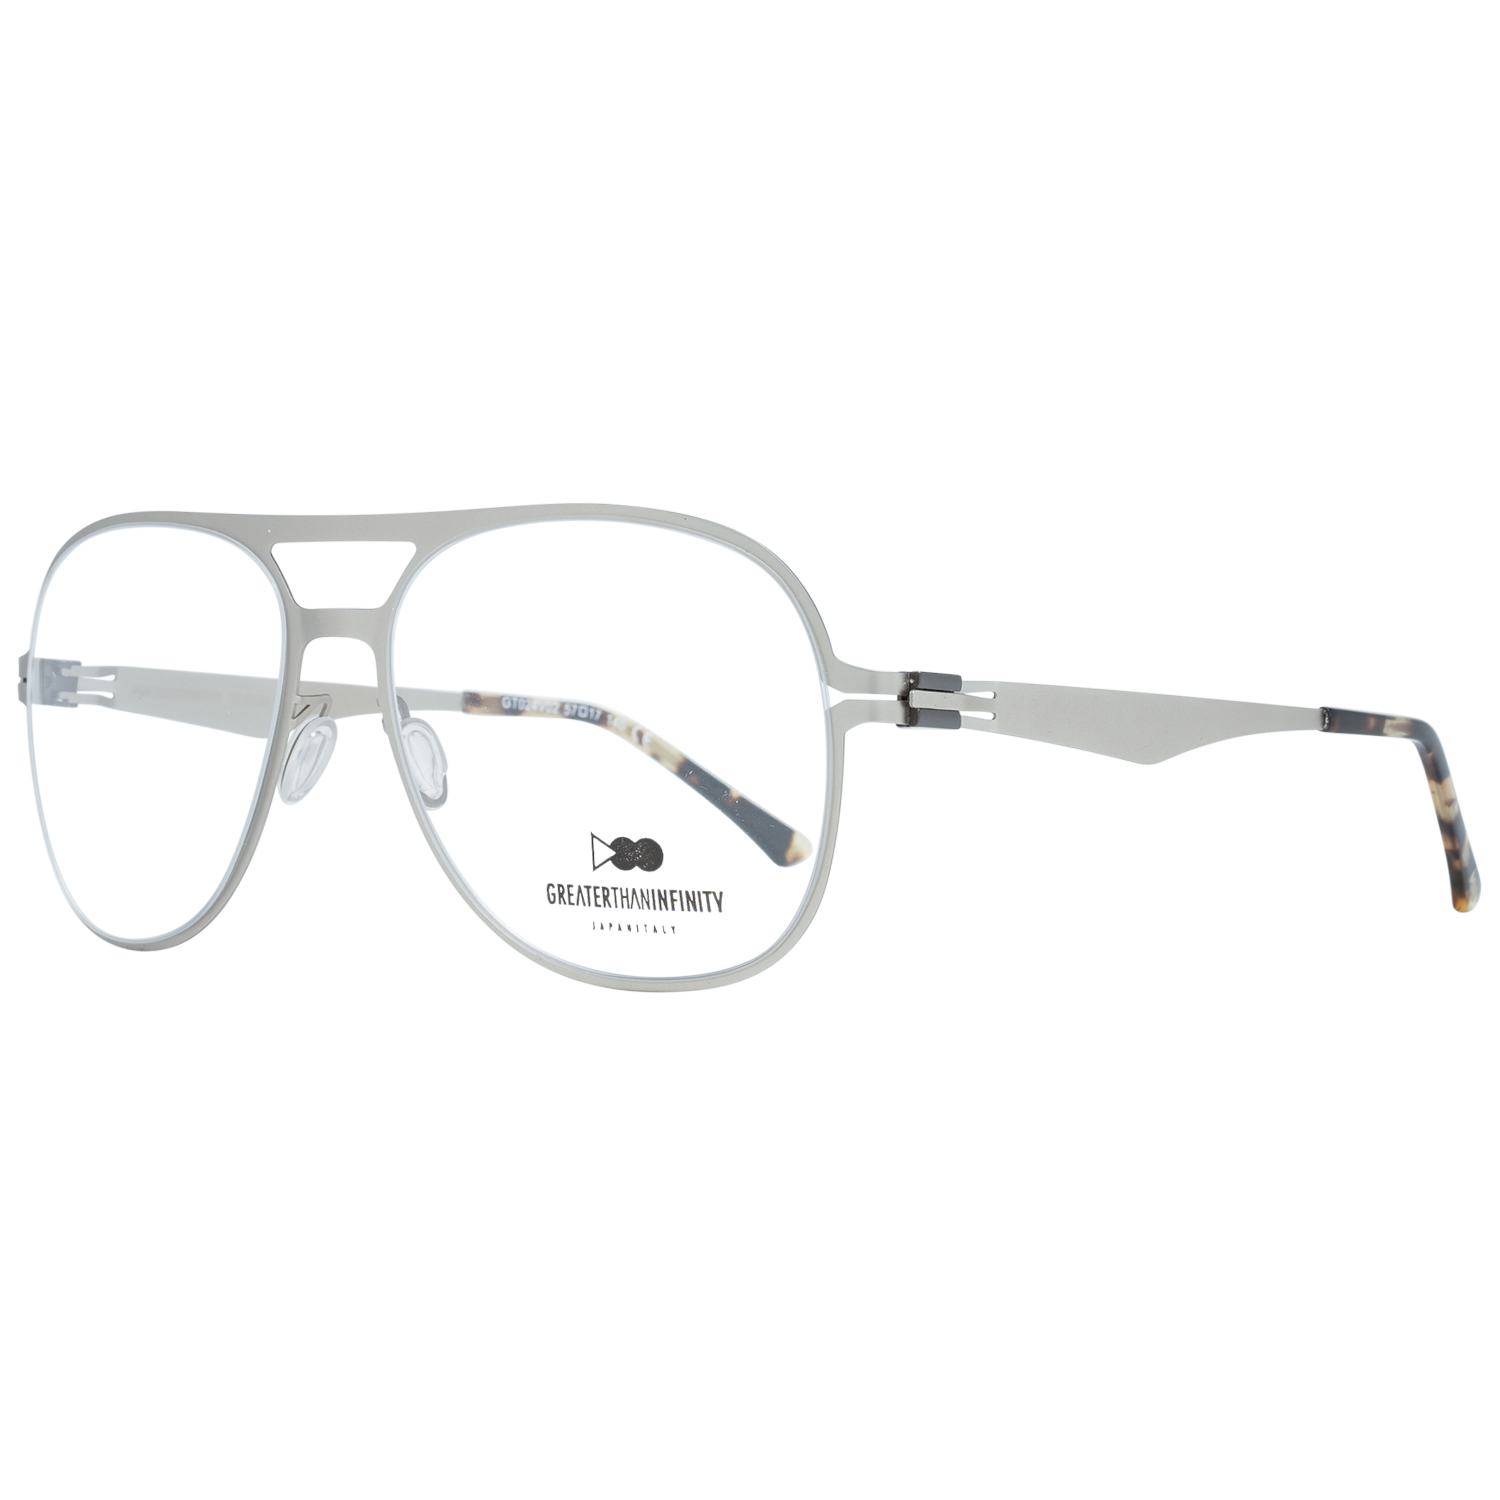 Greater Than Infinity Optical Frame GT024 V02 57 Silver